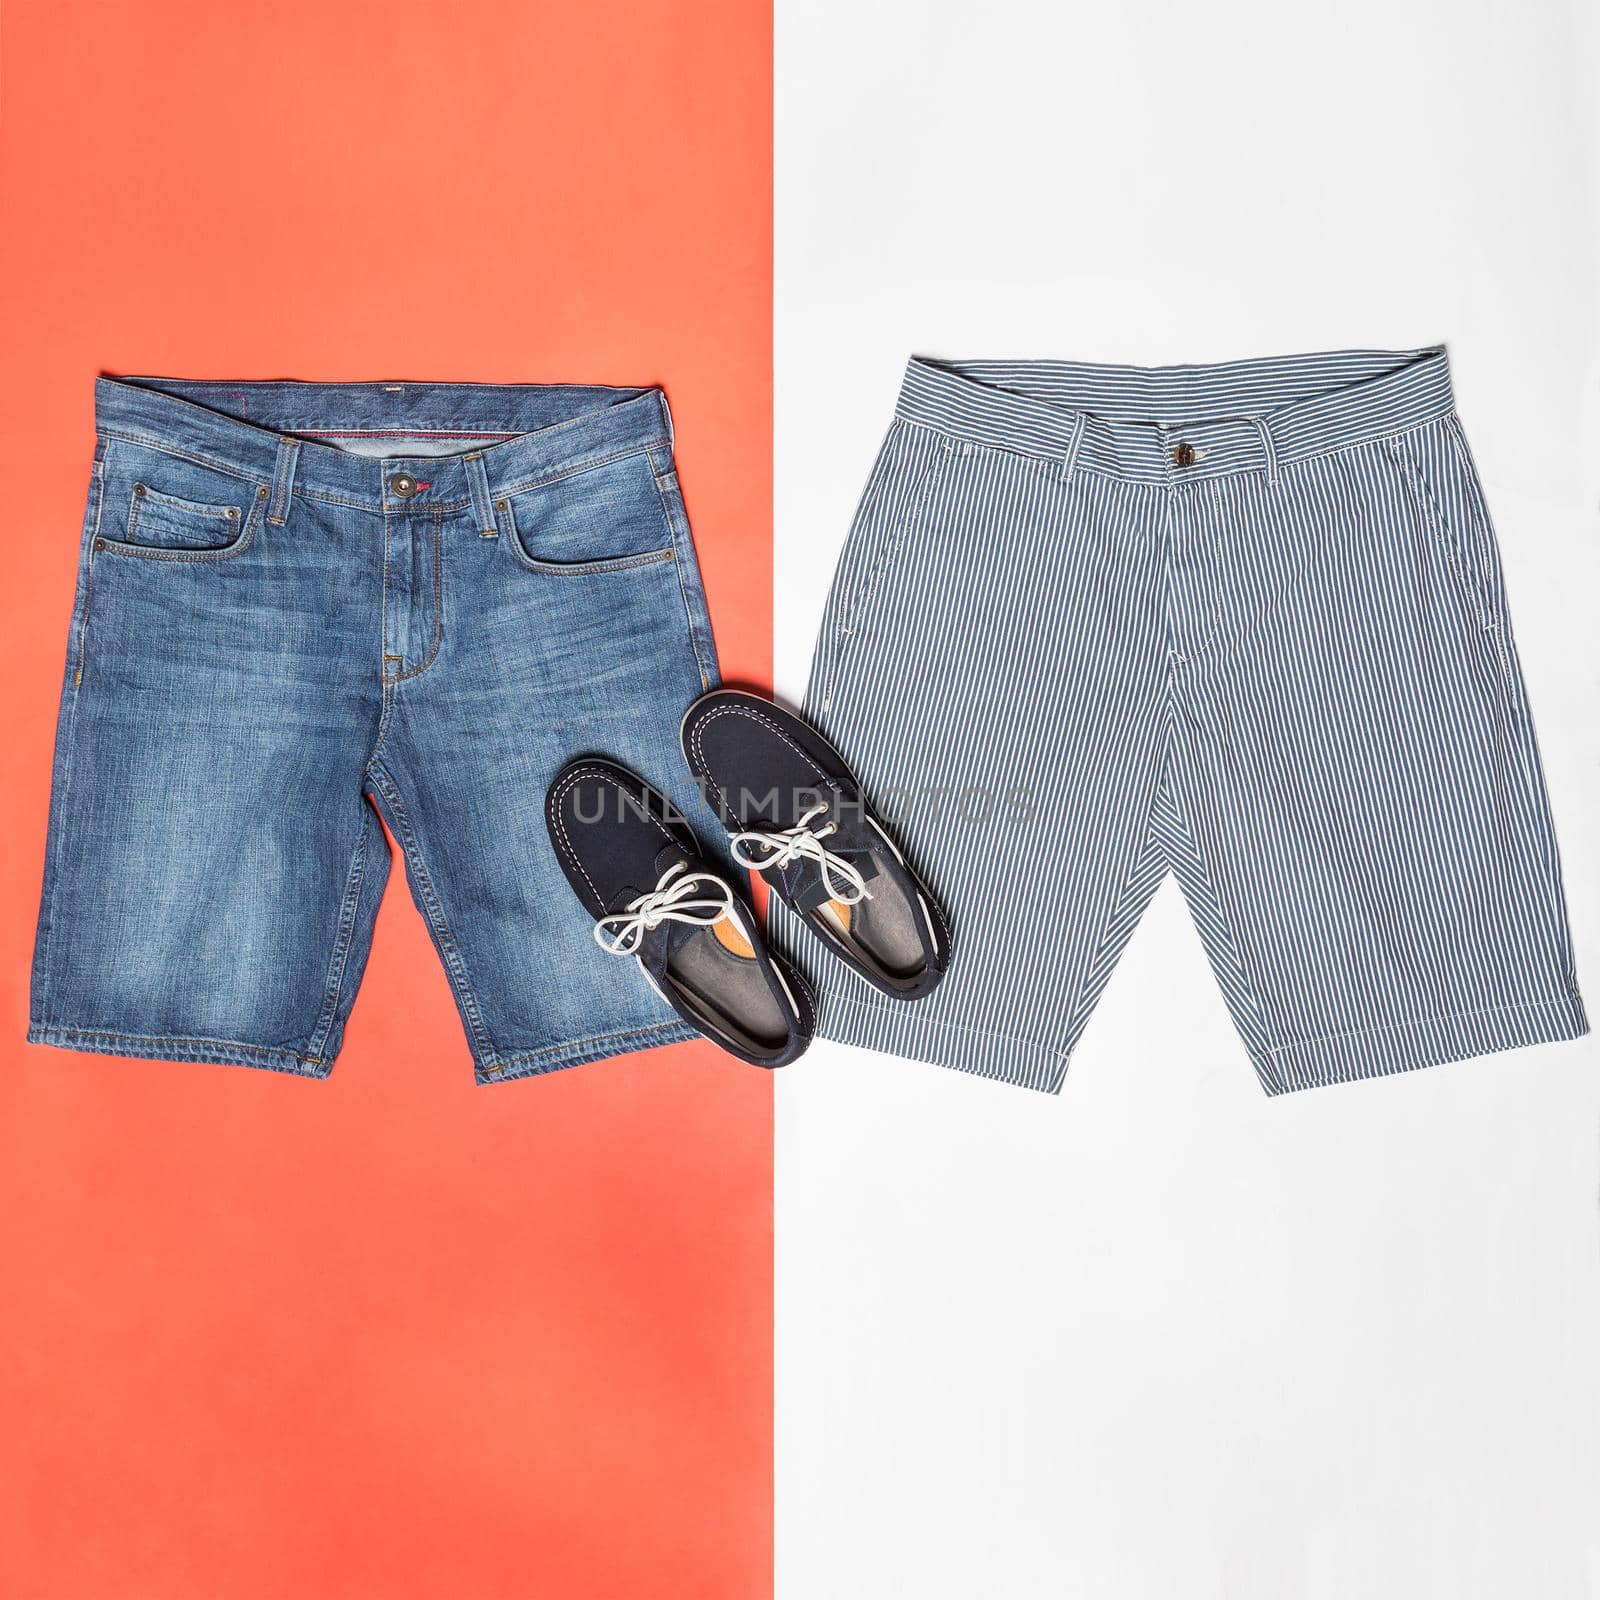 Man jeans shorts with a black shoes isolated background